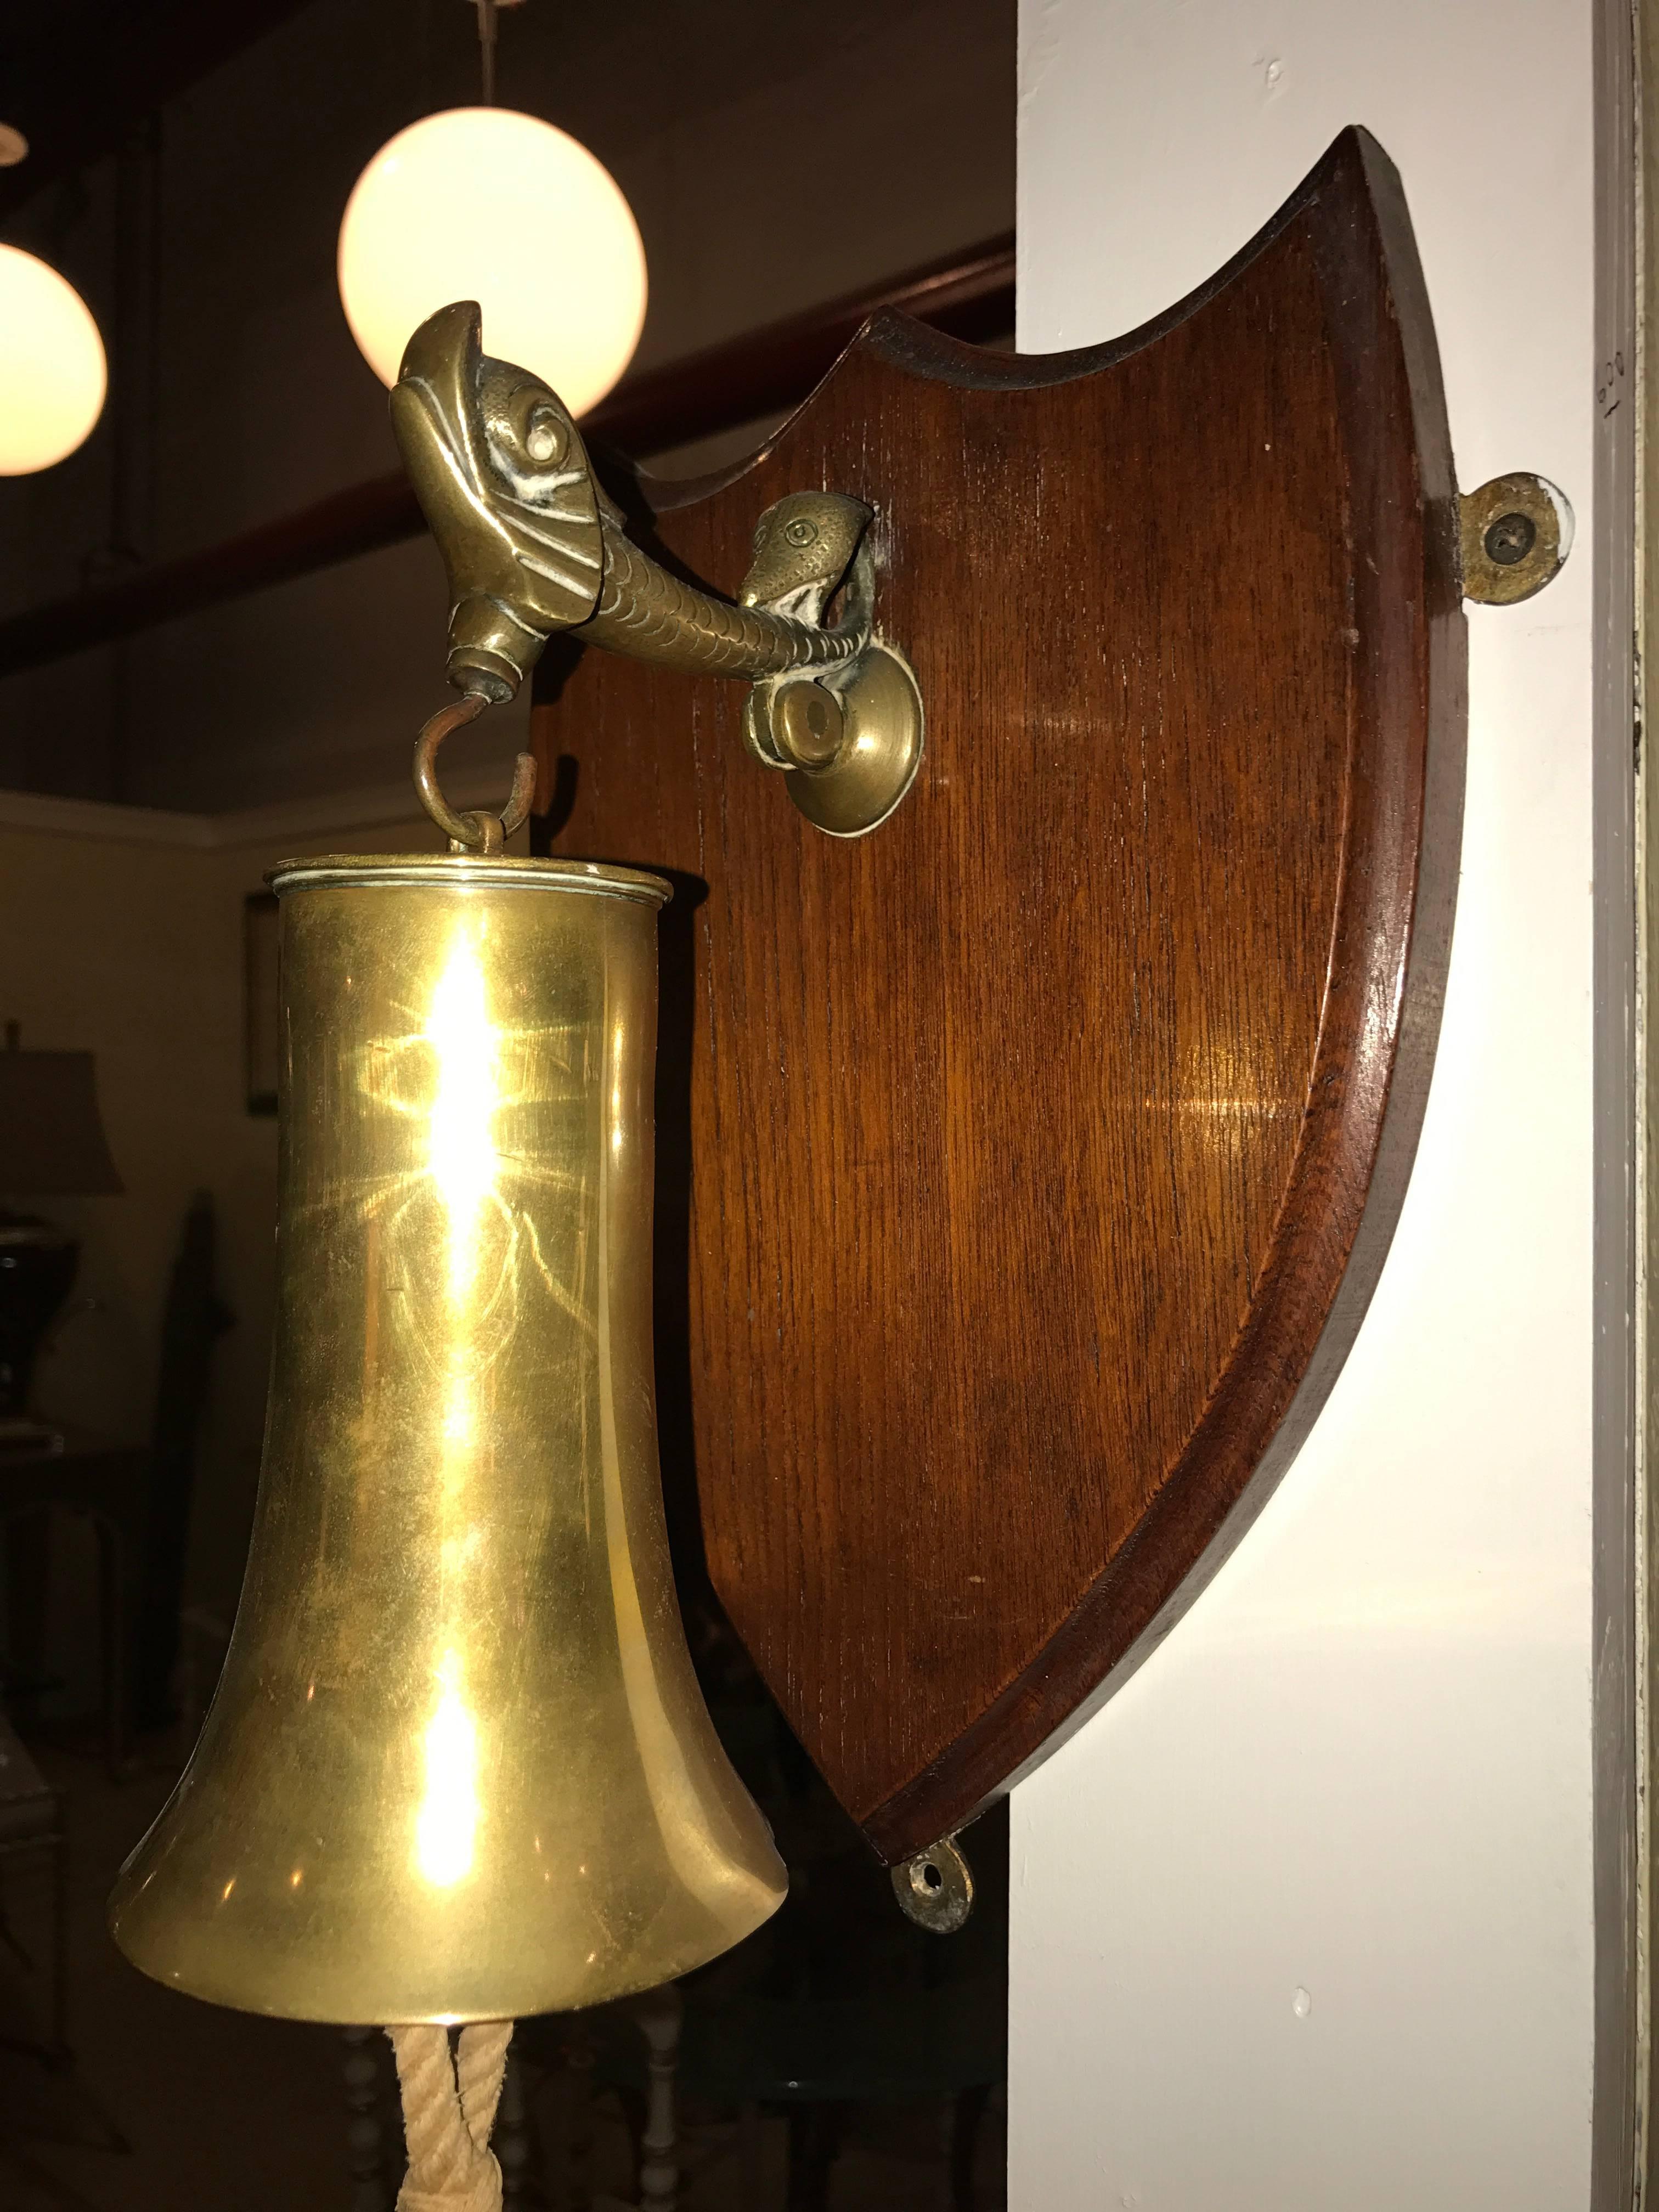 Mounted Ships Bell Made from Artillary Shell, Signed 4